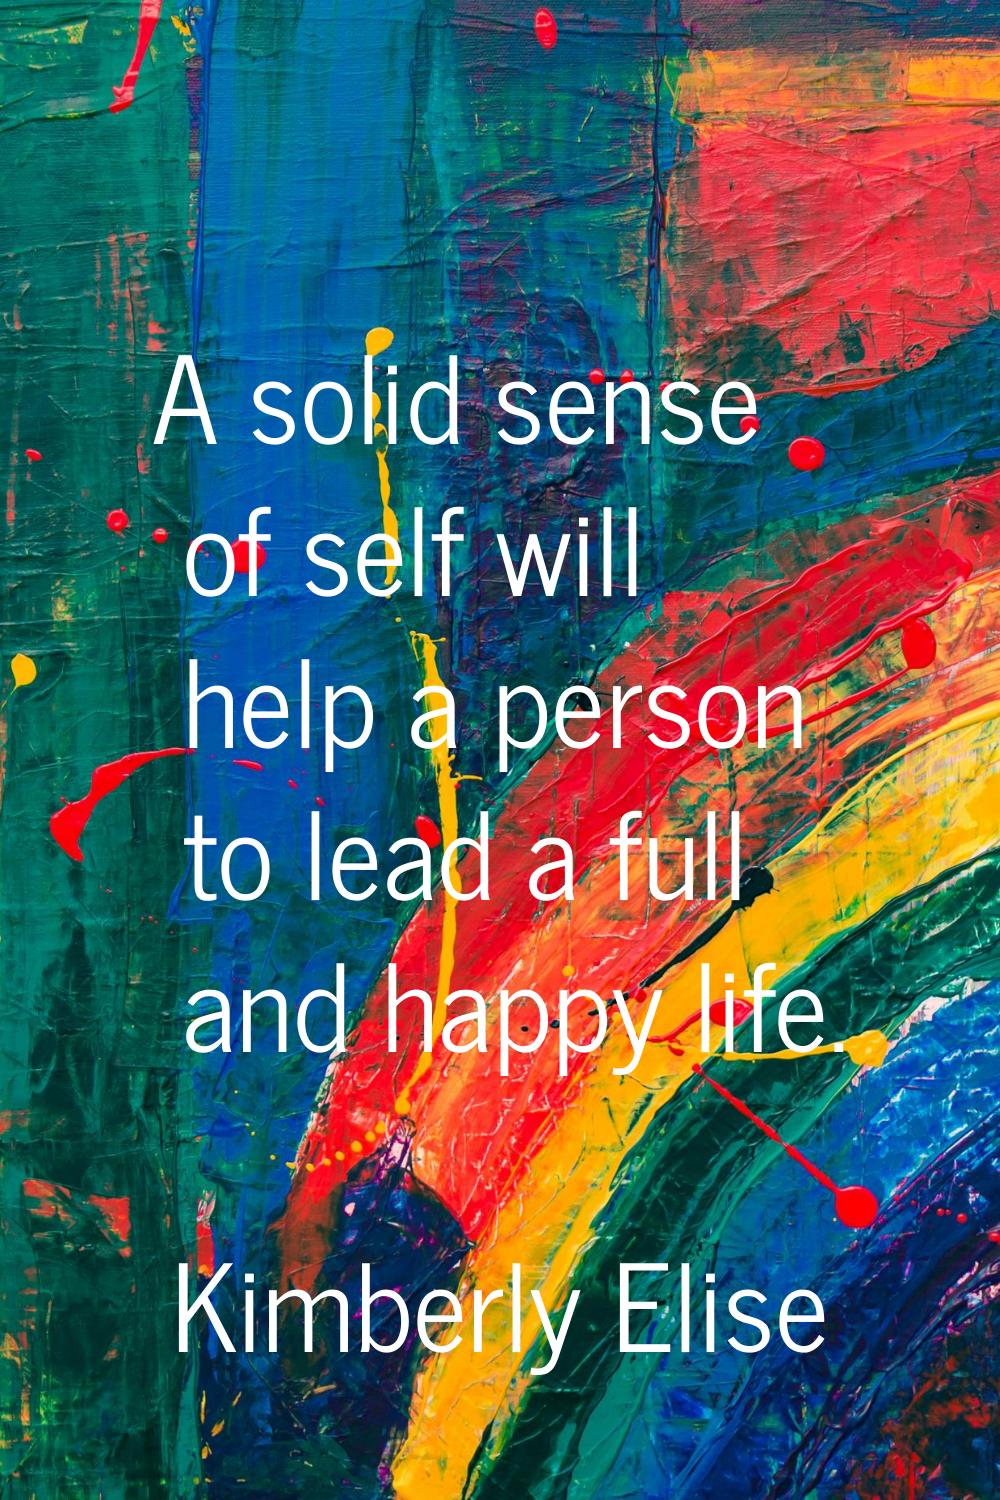 A solid sense of self will help a person to lead a full and happy life.